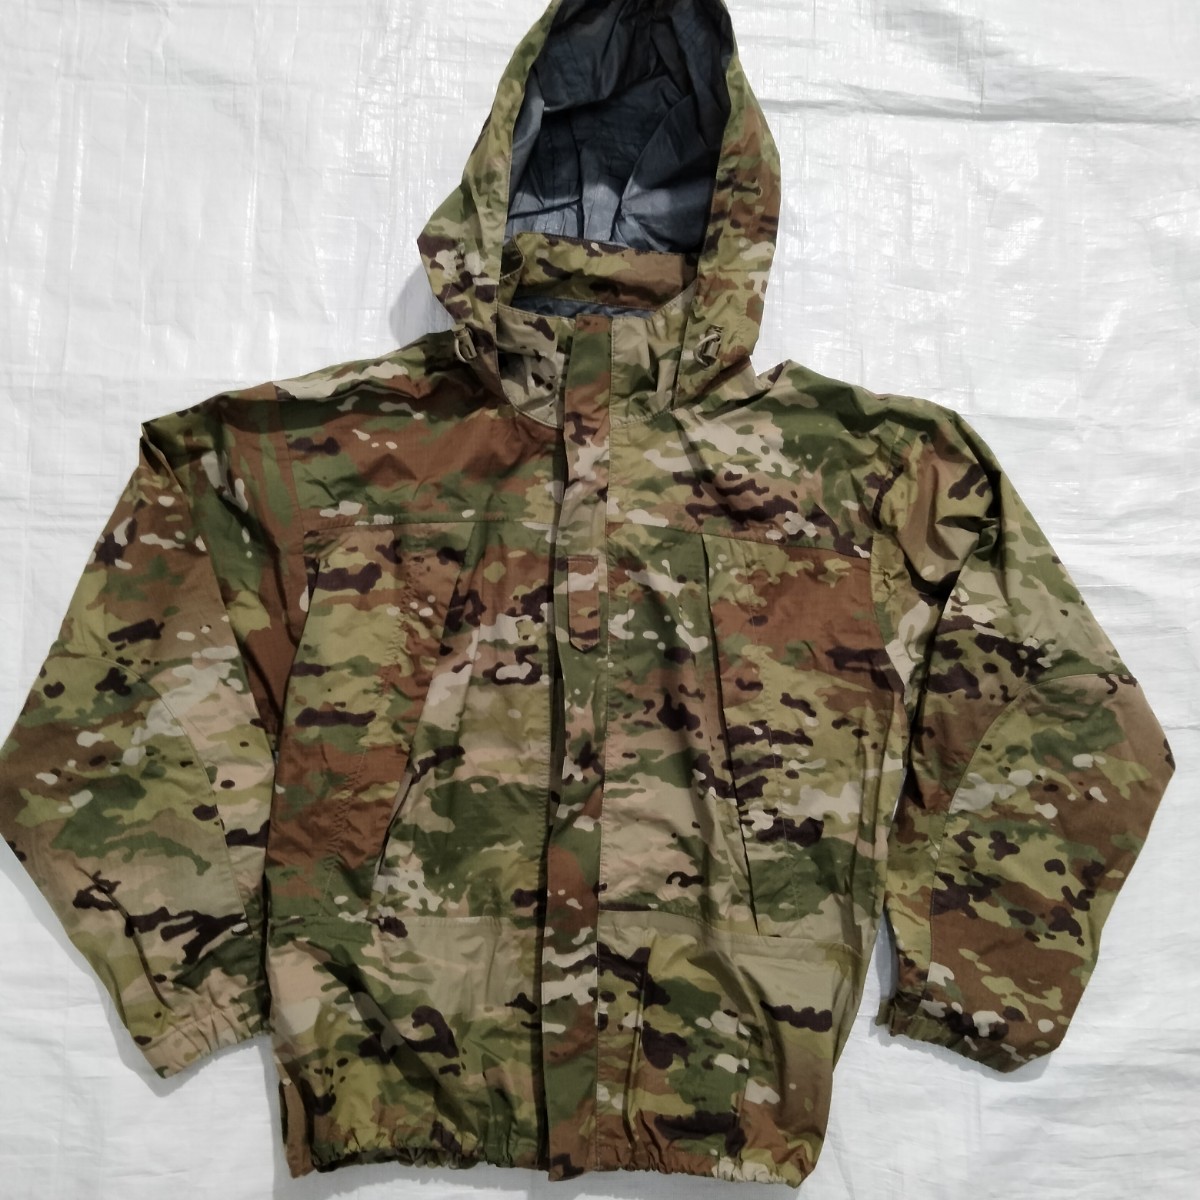 US ARMY EXTREME COLD WET WEATHER GENERATION Ⅲ LAYER 6 OPERATIONAL カモパターン OCP　NSN8415-01-641-0818 parka パーカー　goretex